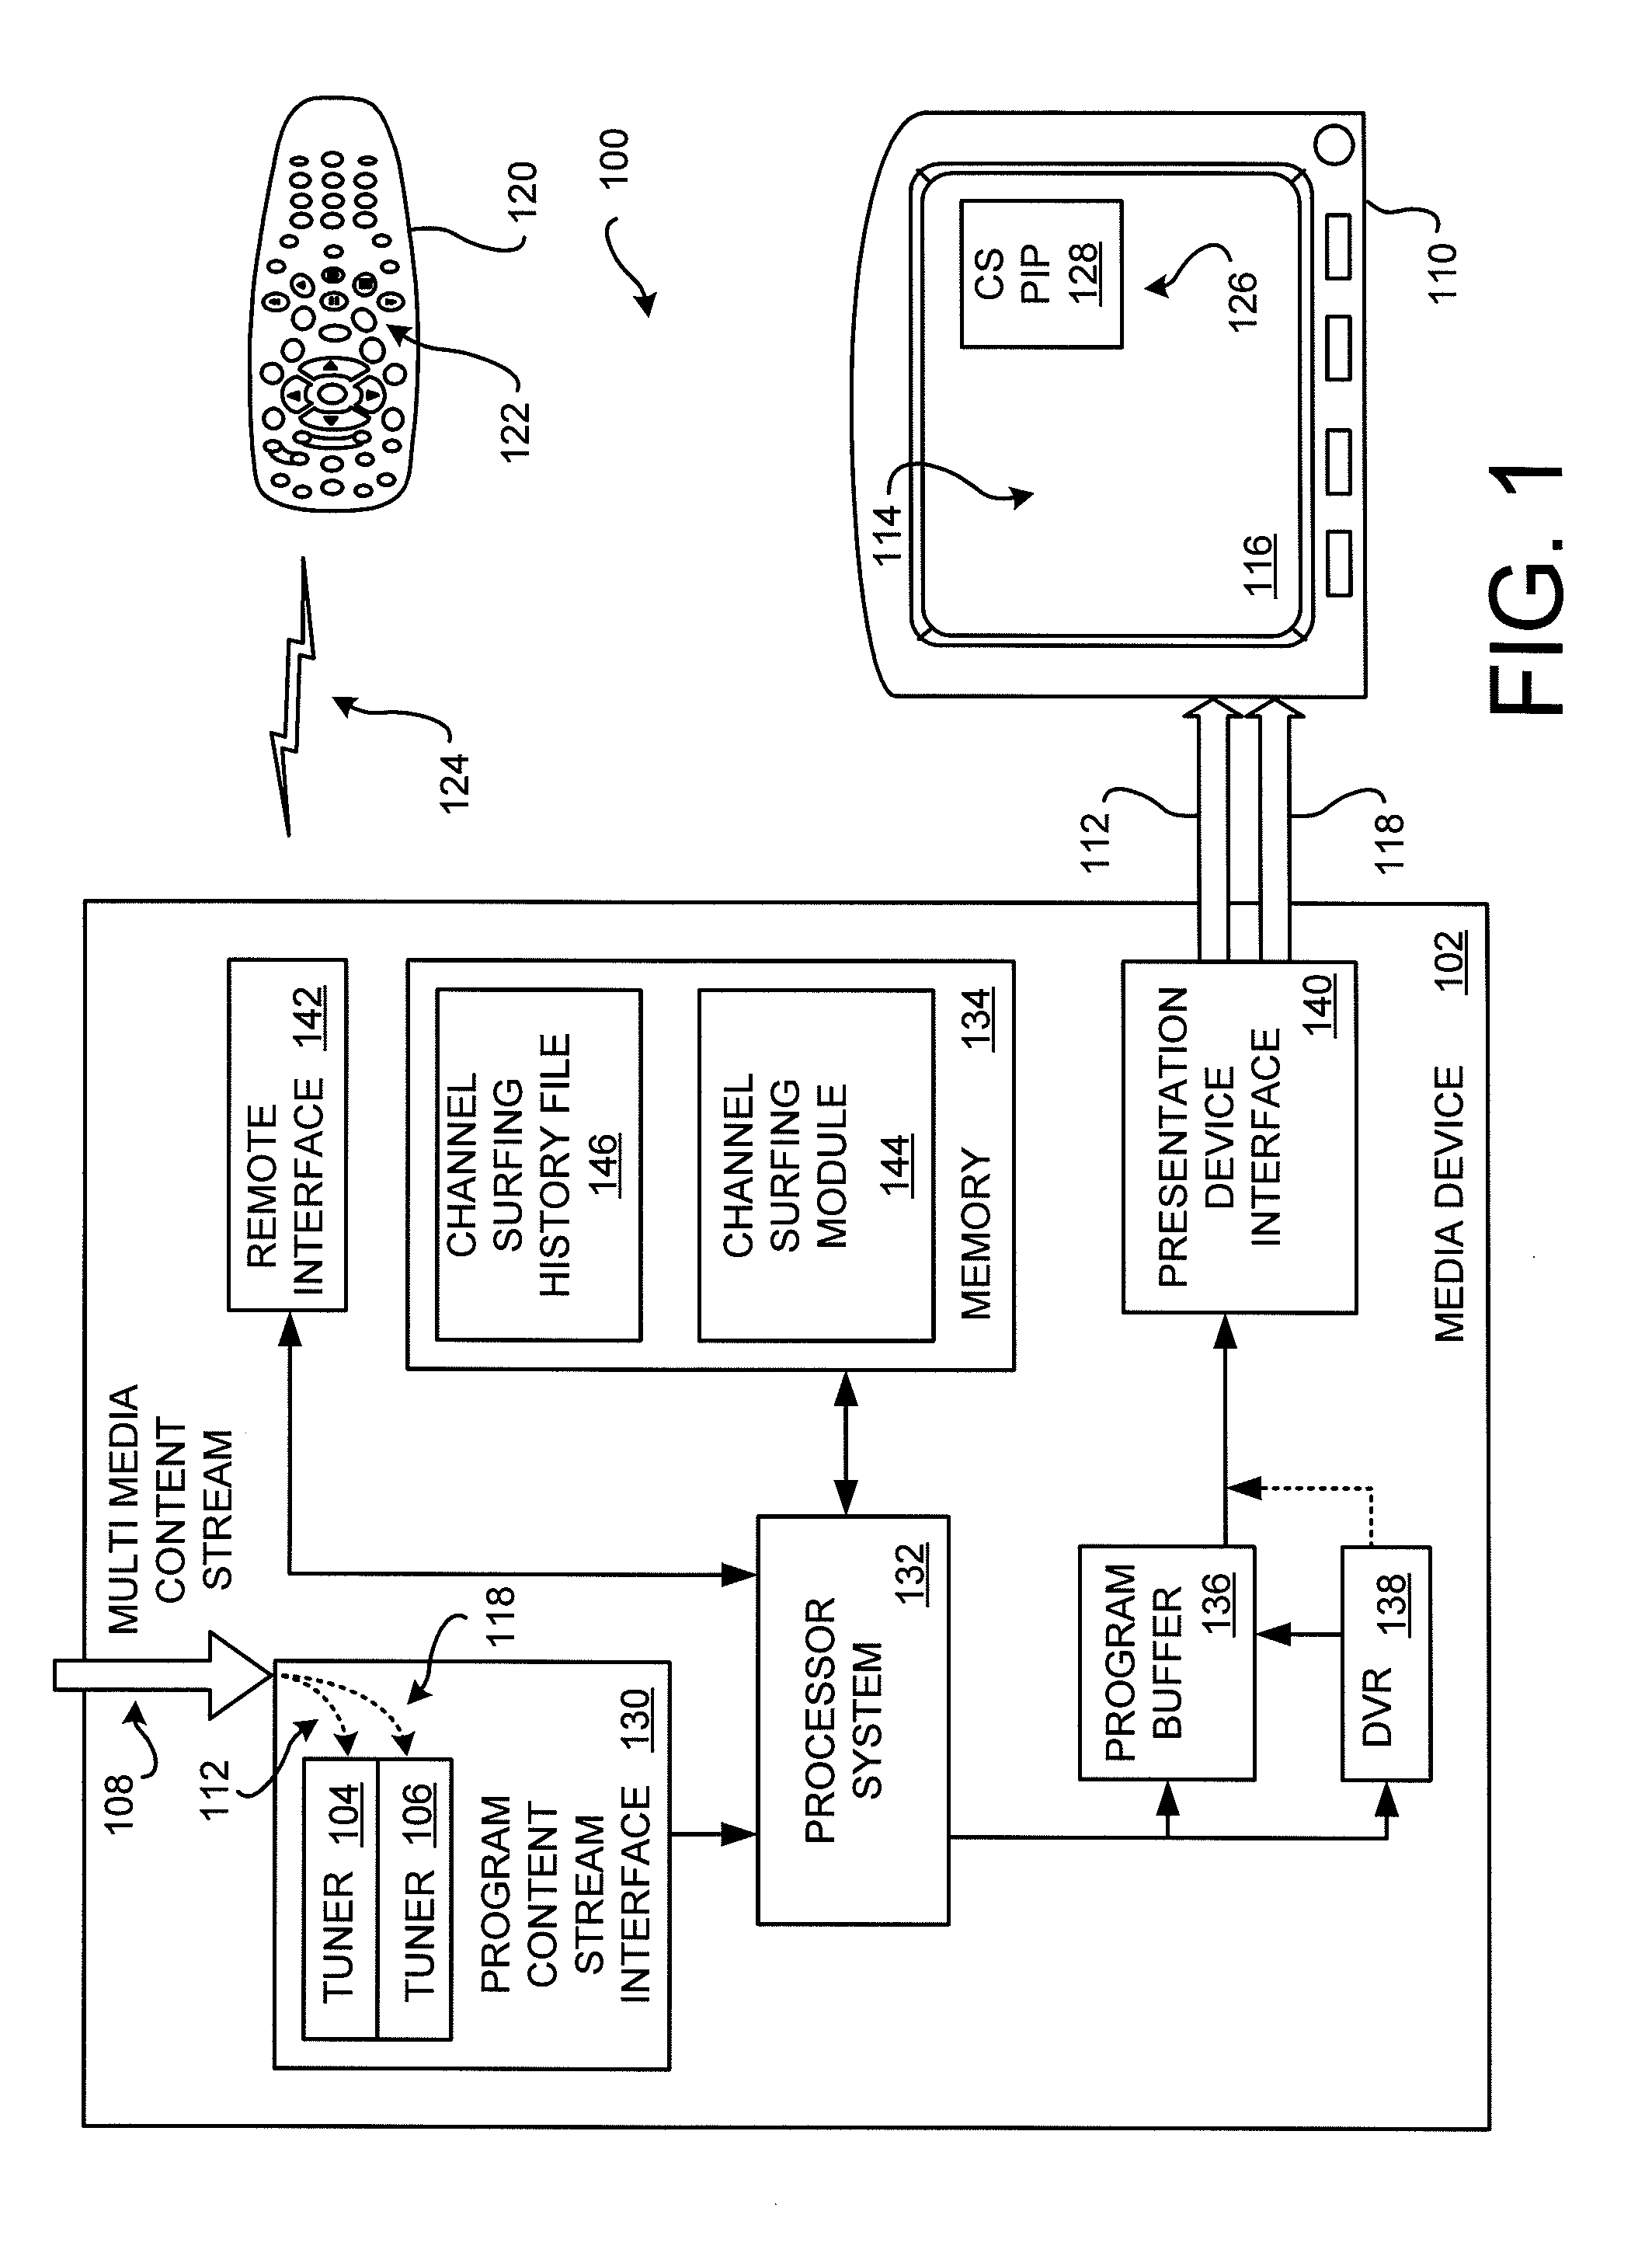 Apparatus, systems and methods for pre-tuning a second tuner in anticipation of a channel surfing activity